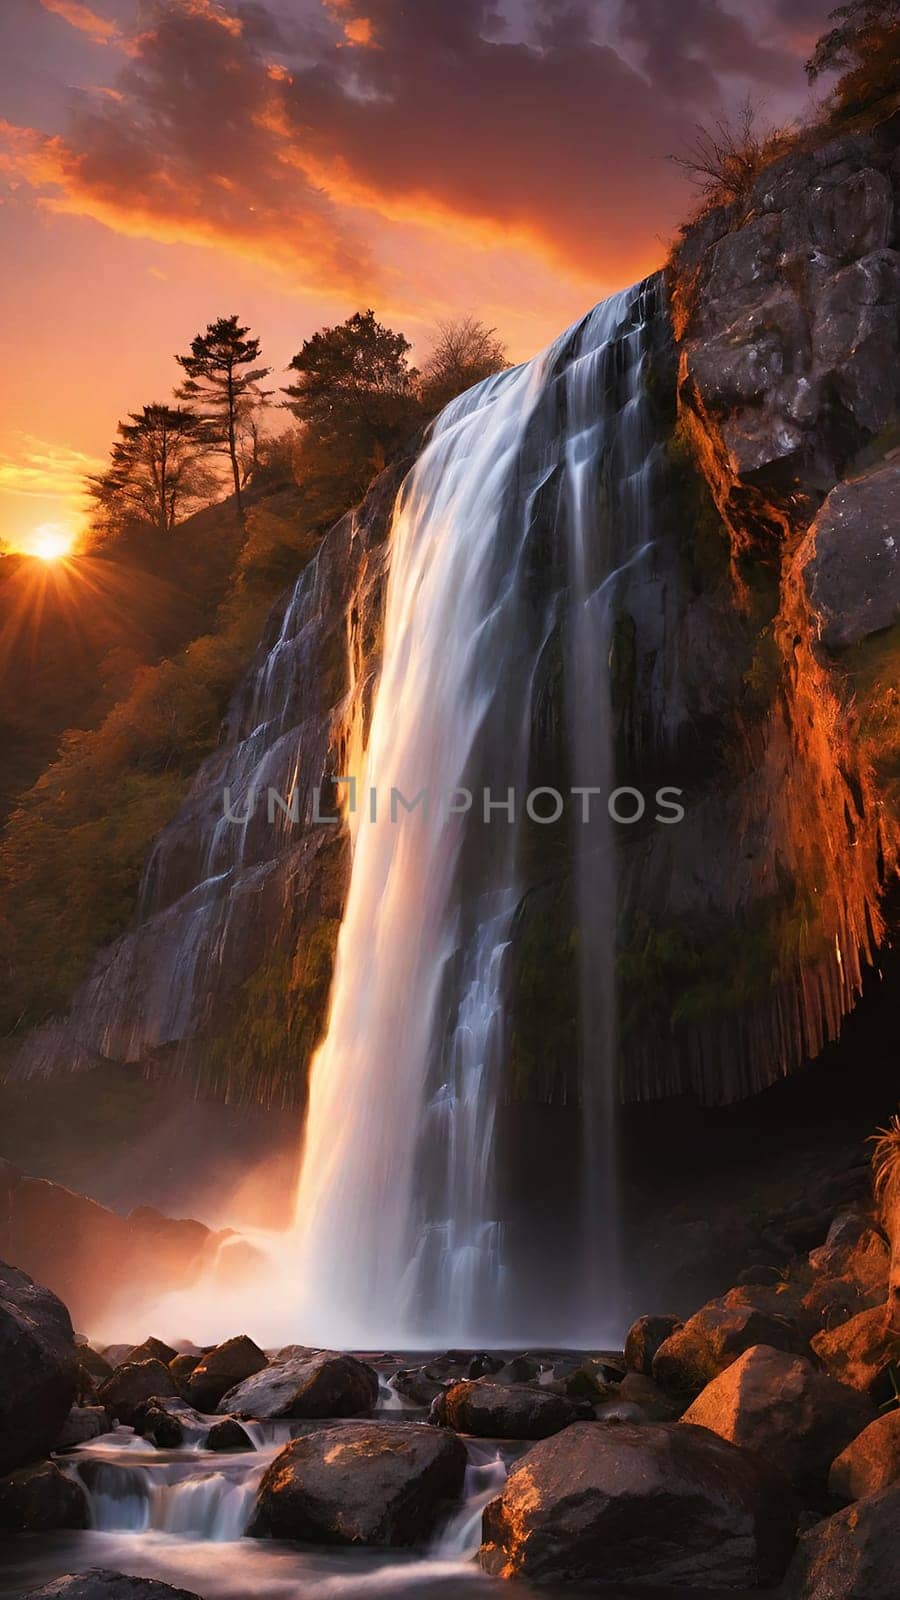 Waterfall at sunset in the mountains. by yilmazsavaskandag